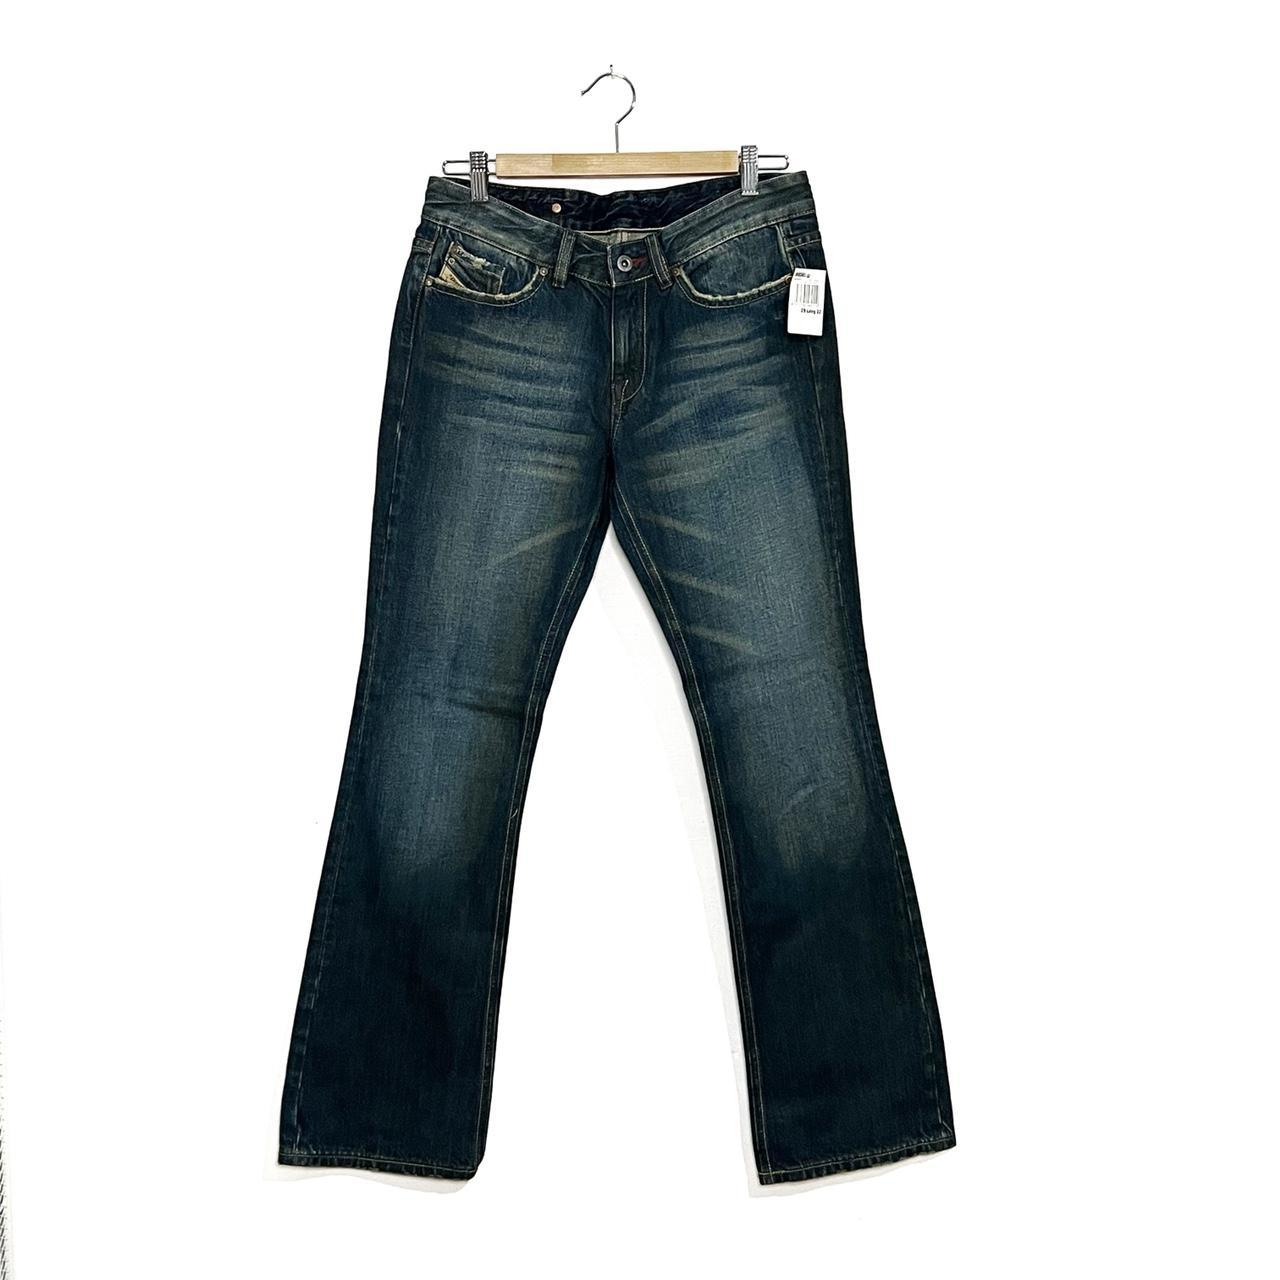 Diesel | Riden Bootcut Jeans - New With Tags